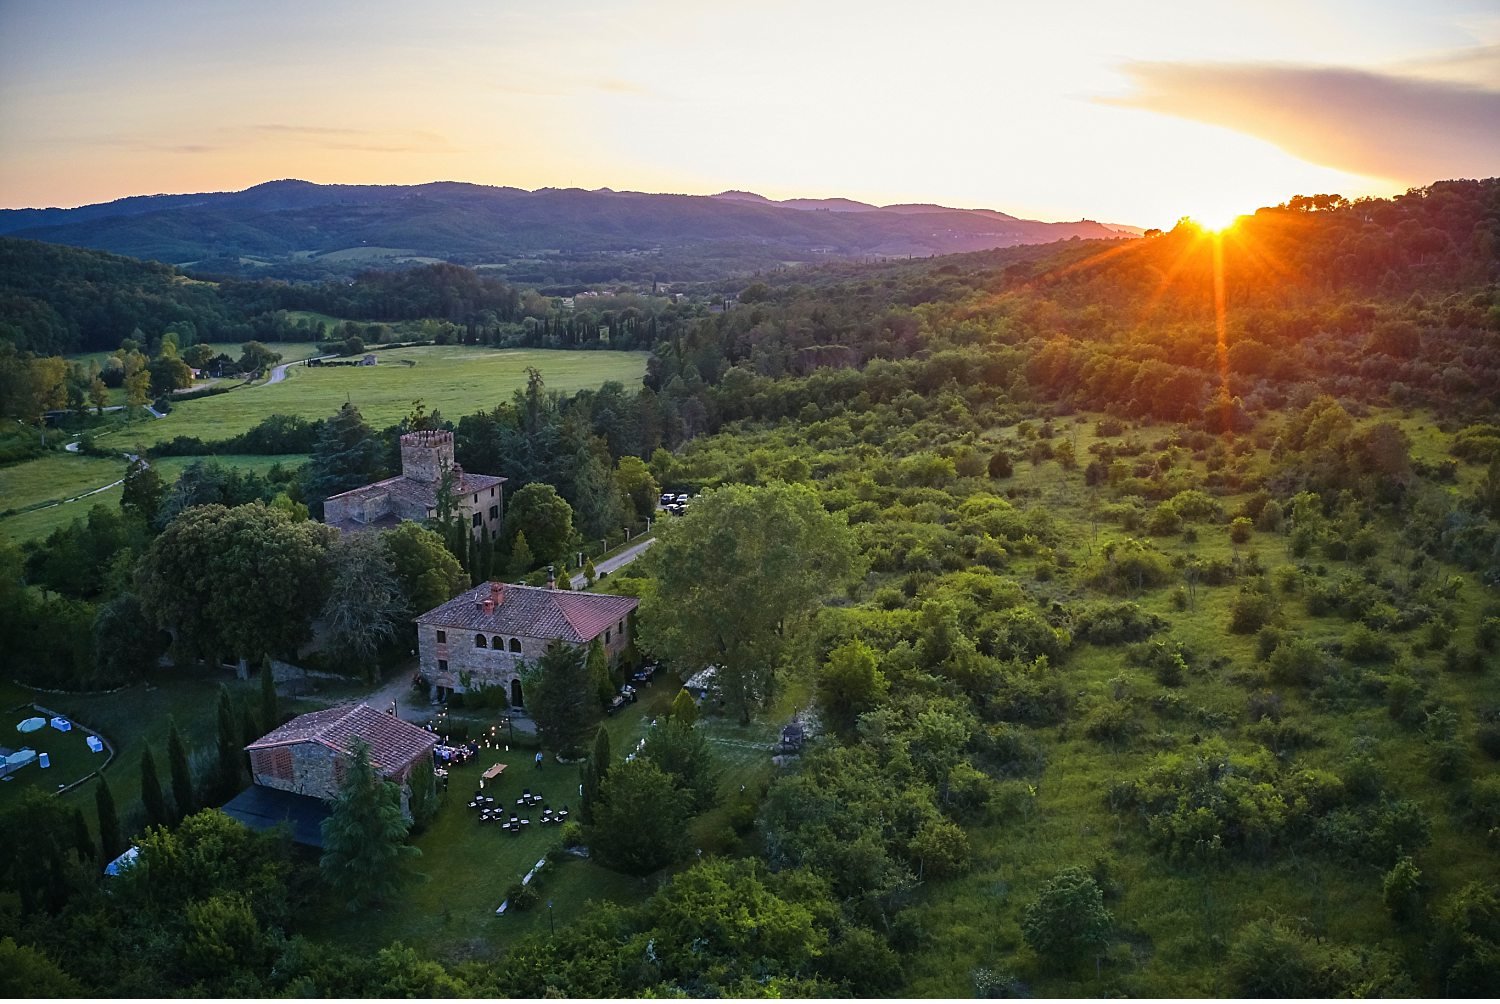  Elegant wedding in Tuscany in the garden of a Villa Cini in Arezzo - Immortalize your special day with this splendid photo of an enchanting wedding in one of the most beautiful Tuscan villas. The ceremony in the garden underlines the romantic and re